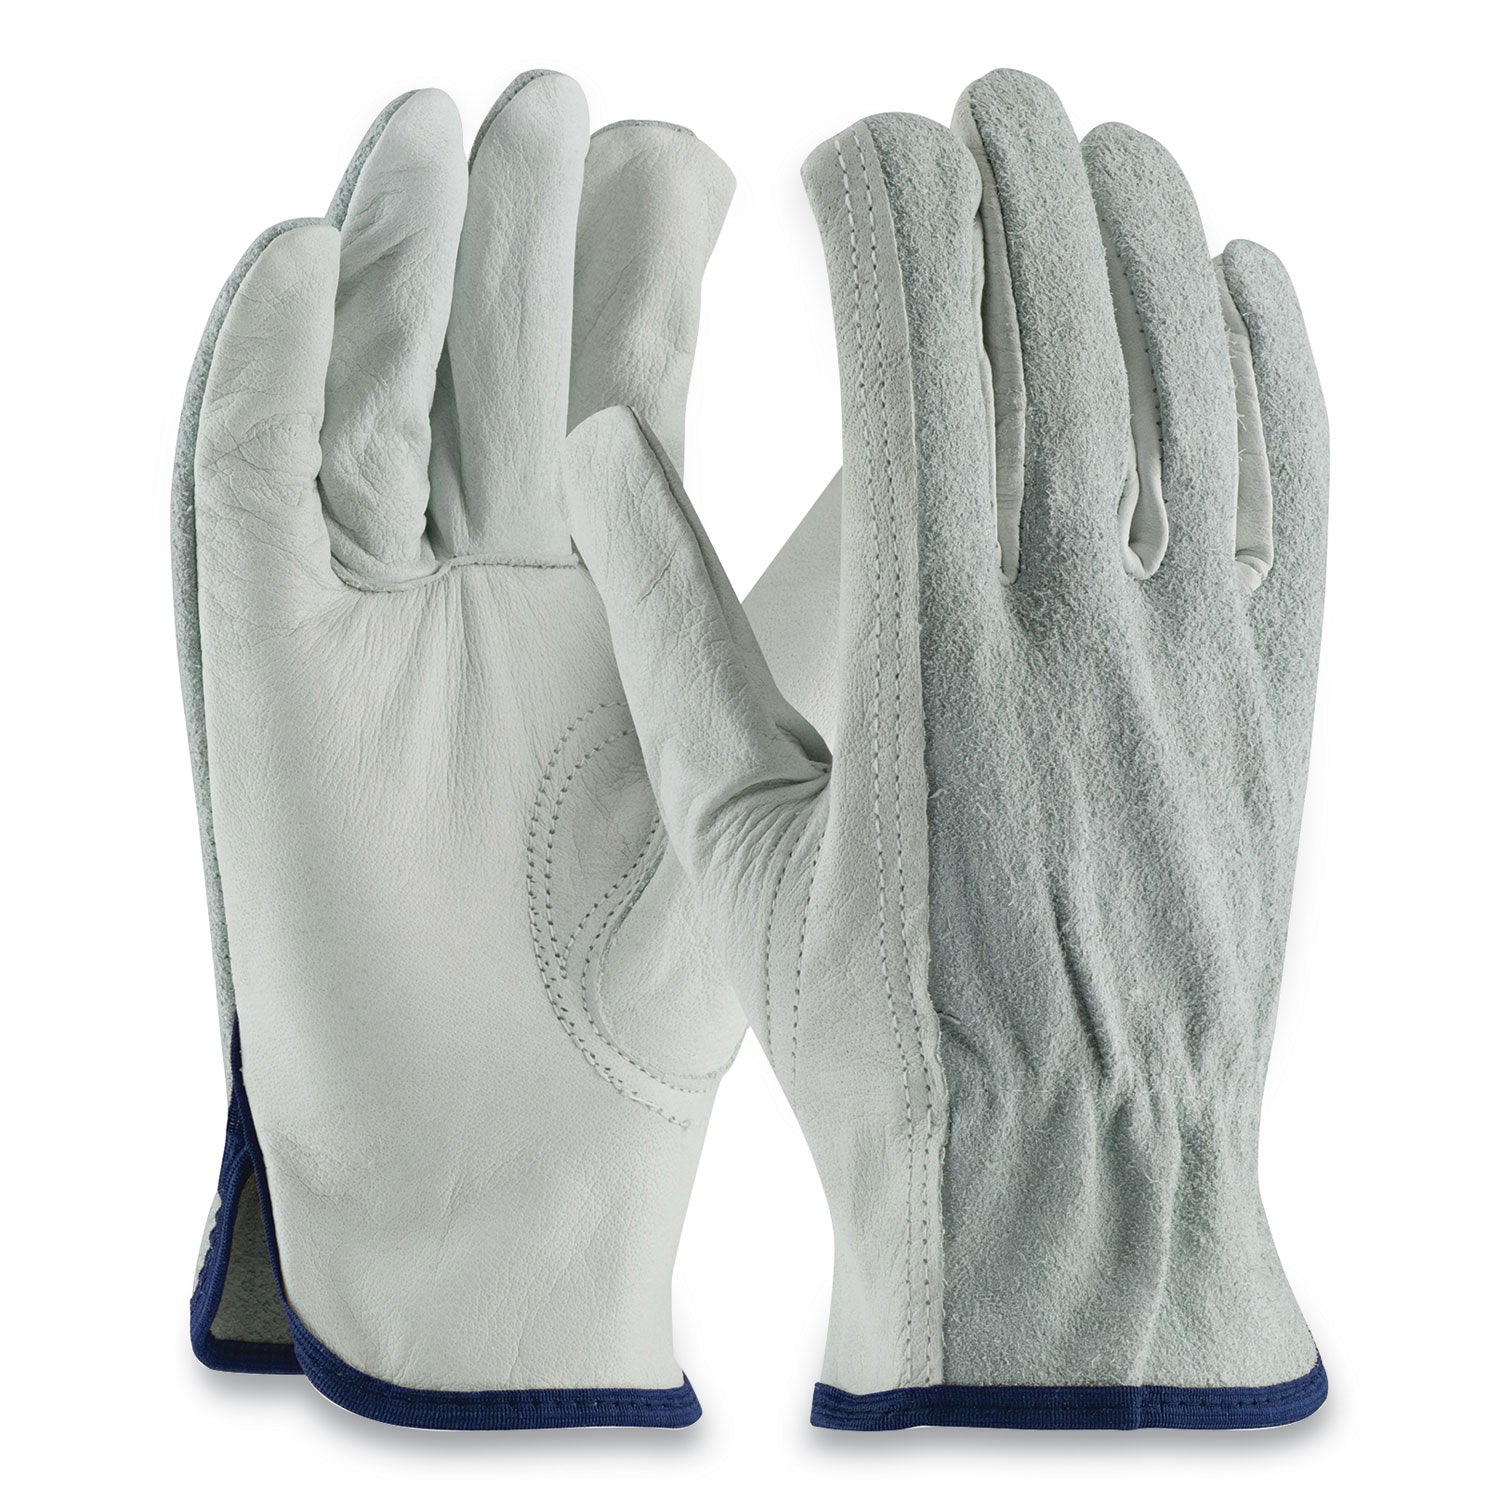 top-grain-leather-drivers-gloves-with-shoulder-split-cowhide-leather-back-x-large-gray_pid68161sbxl - 2